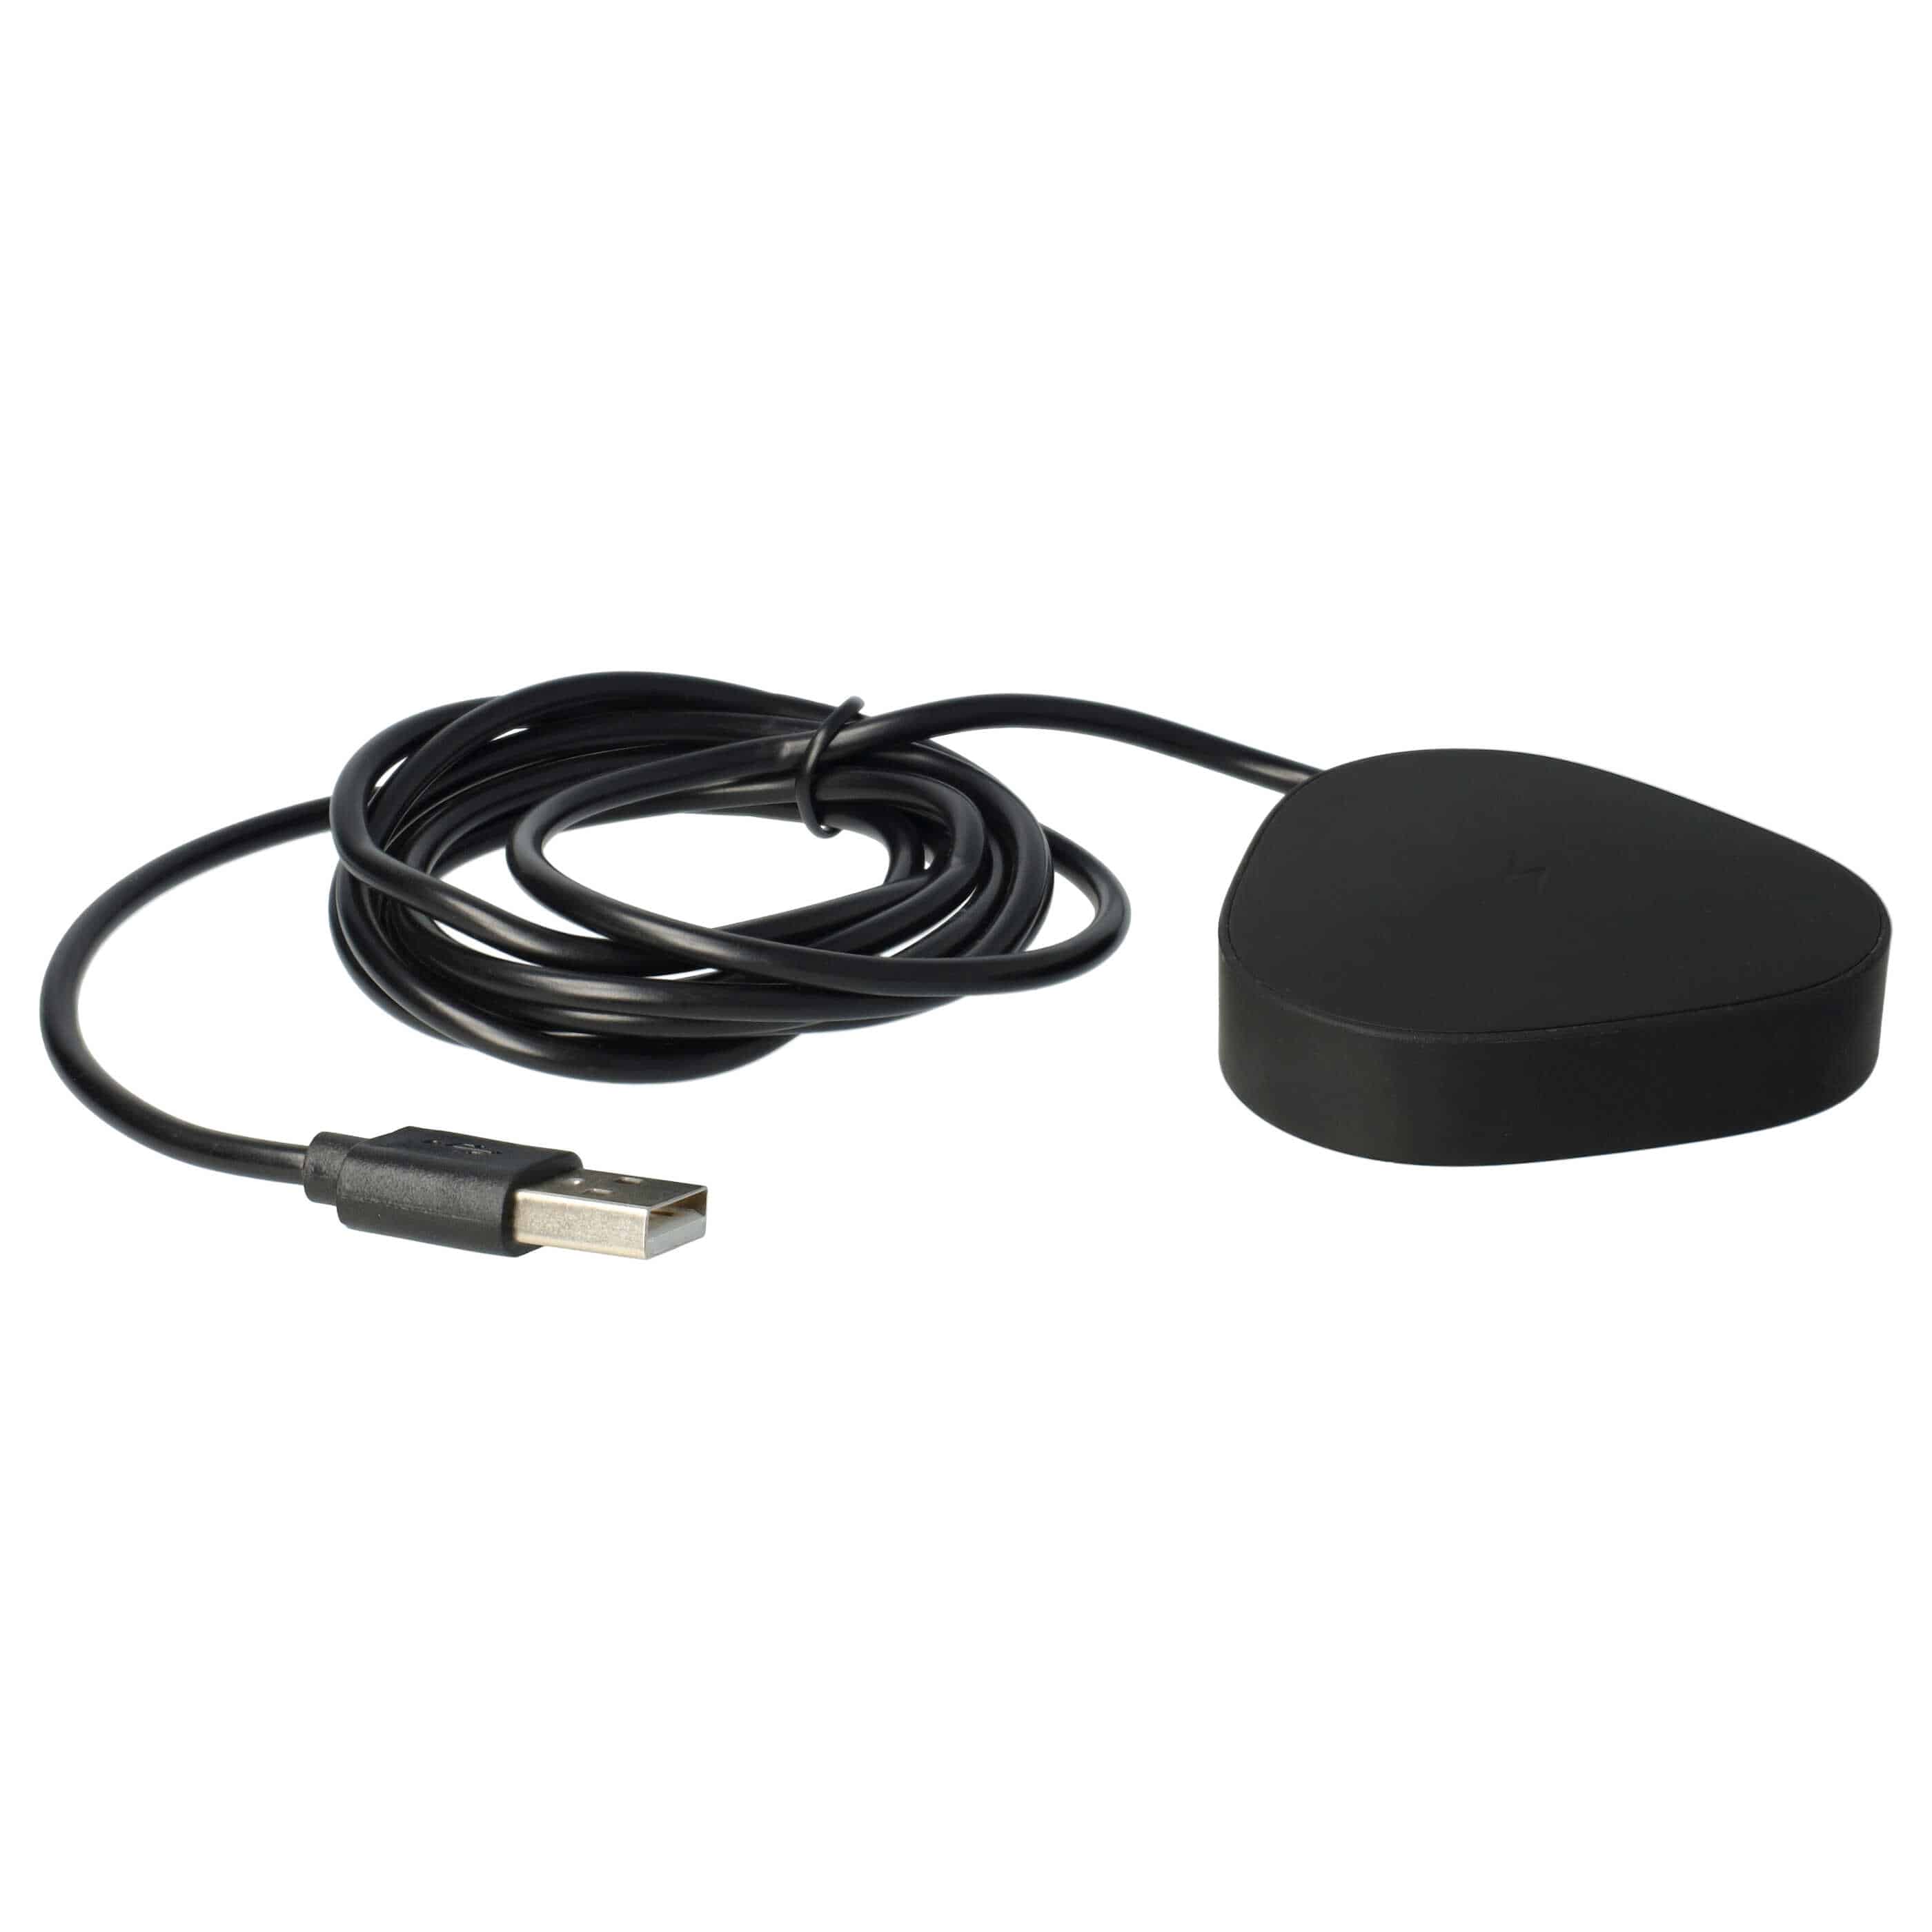 USB Charging Station as Replacement for Sonos Wireless Charger LPS-05WB-I - Charging Cable Black